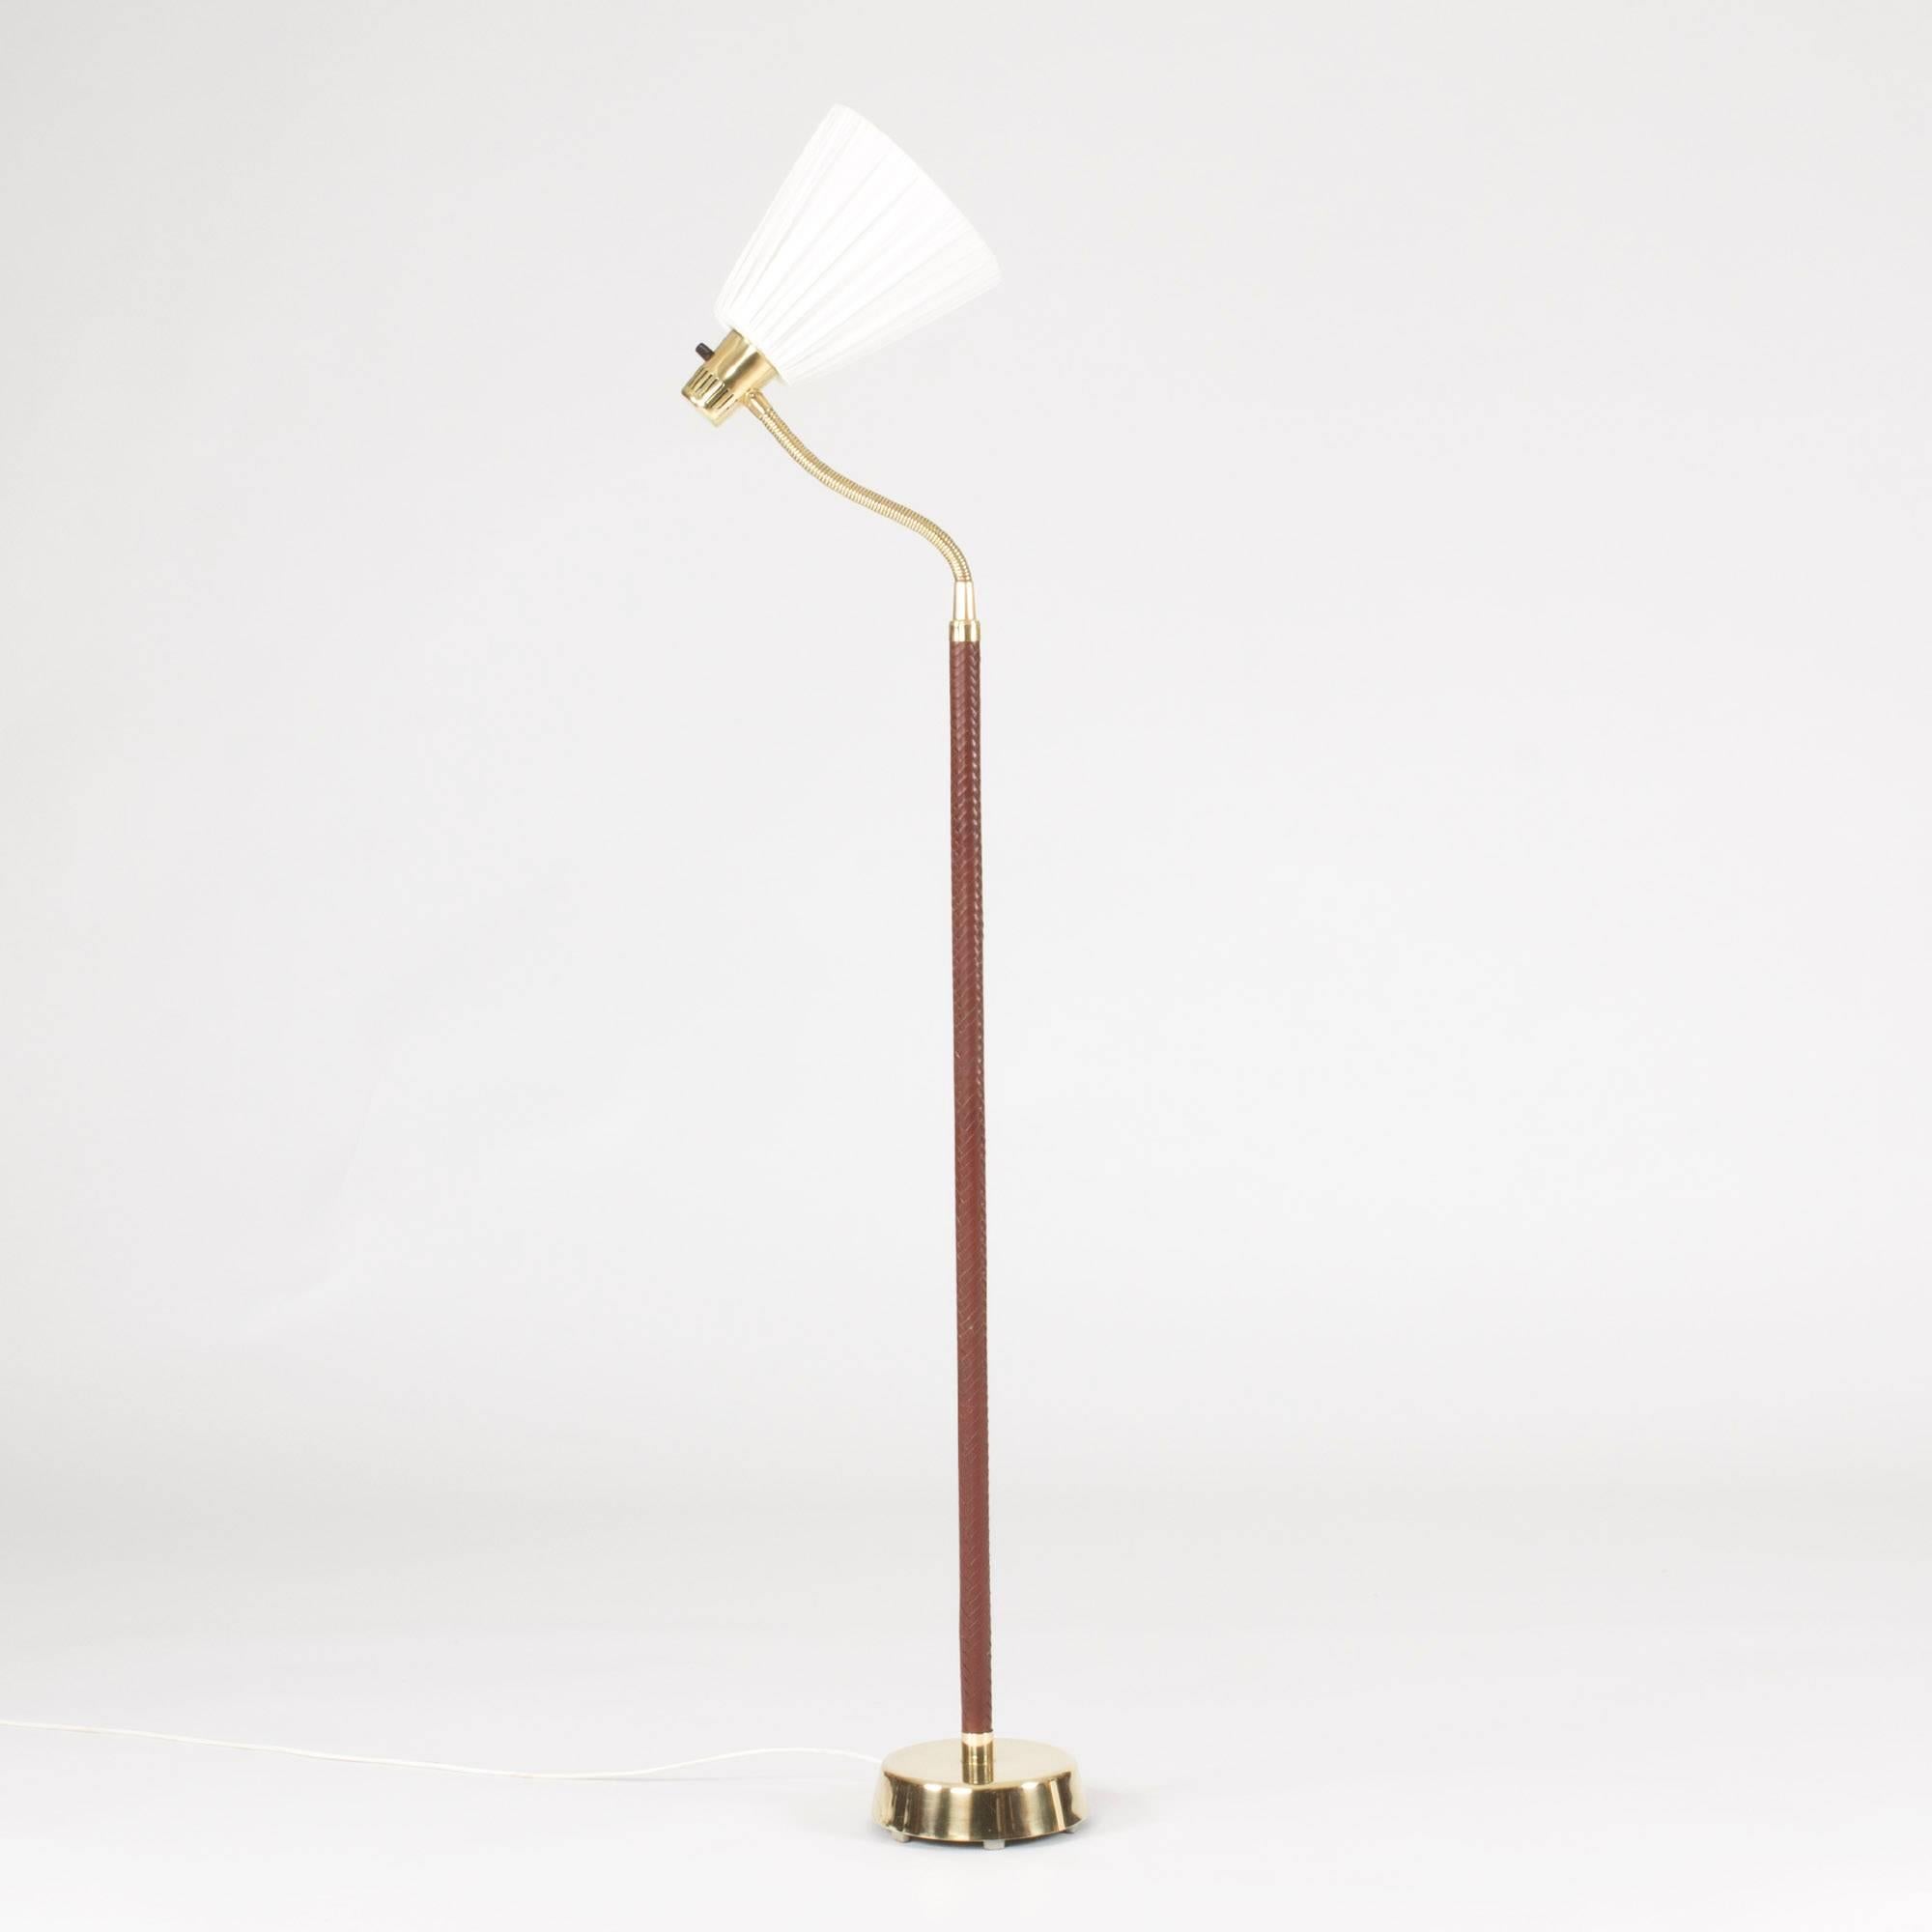 Elegant floor lamp by Hans Bergström with a flexible neck. Made from brass and luxurious, oxblood red wreathed leather along the pole.